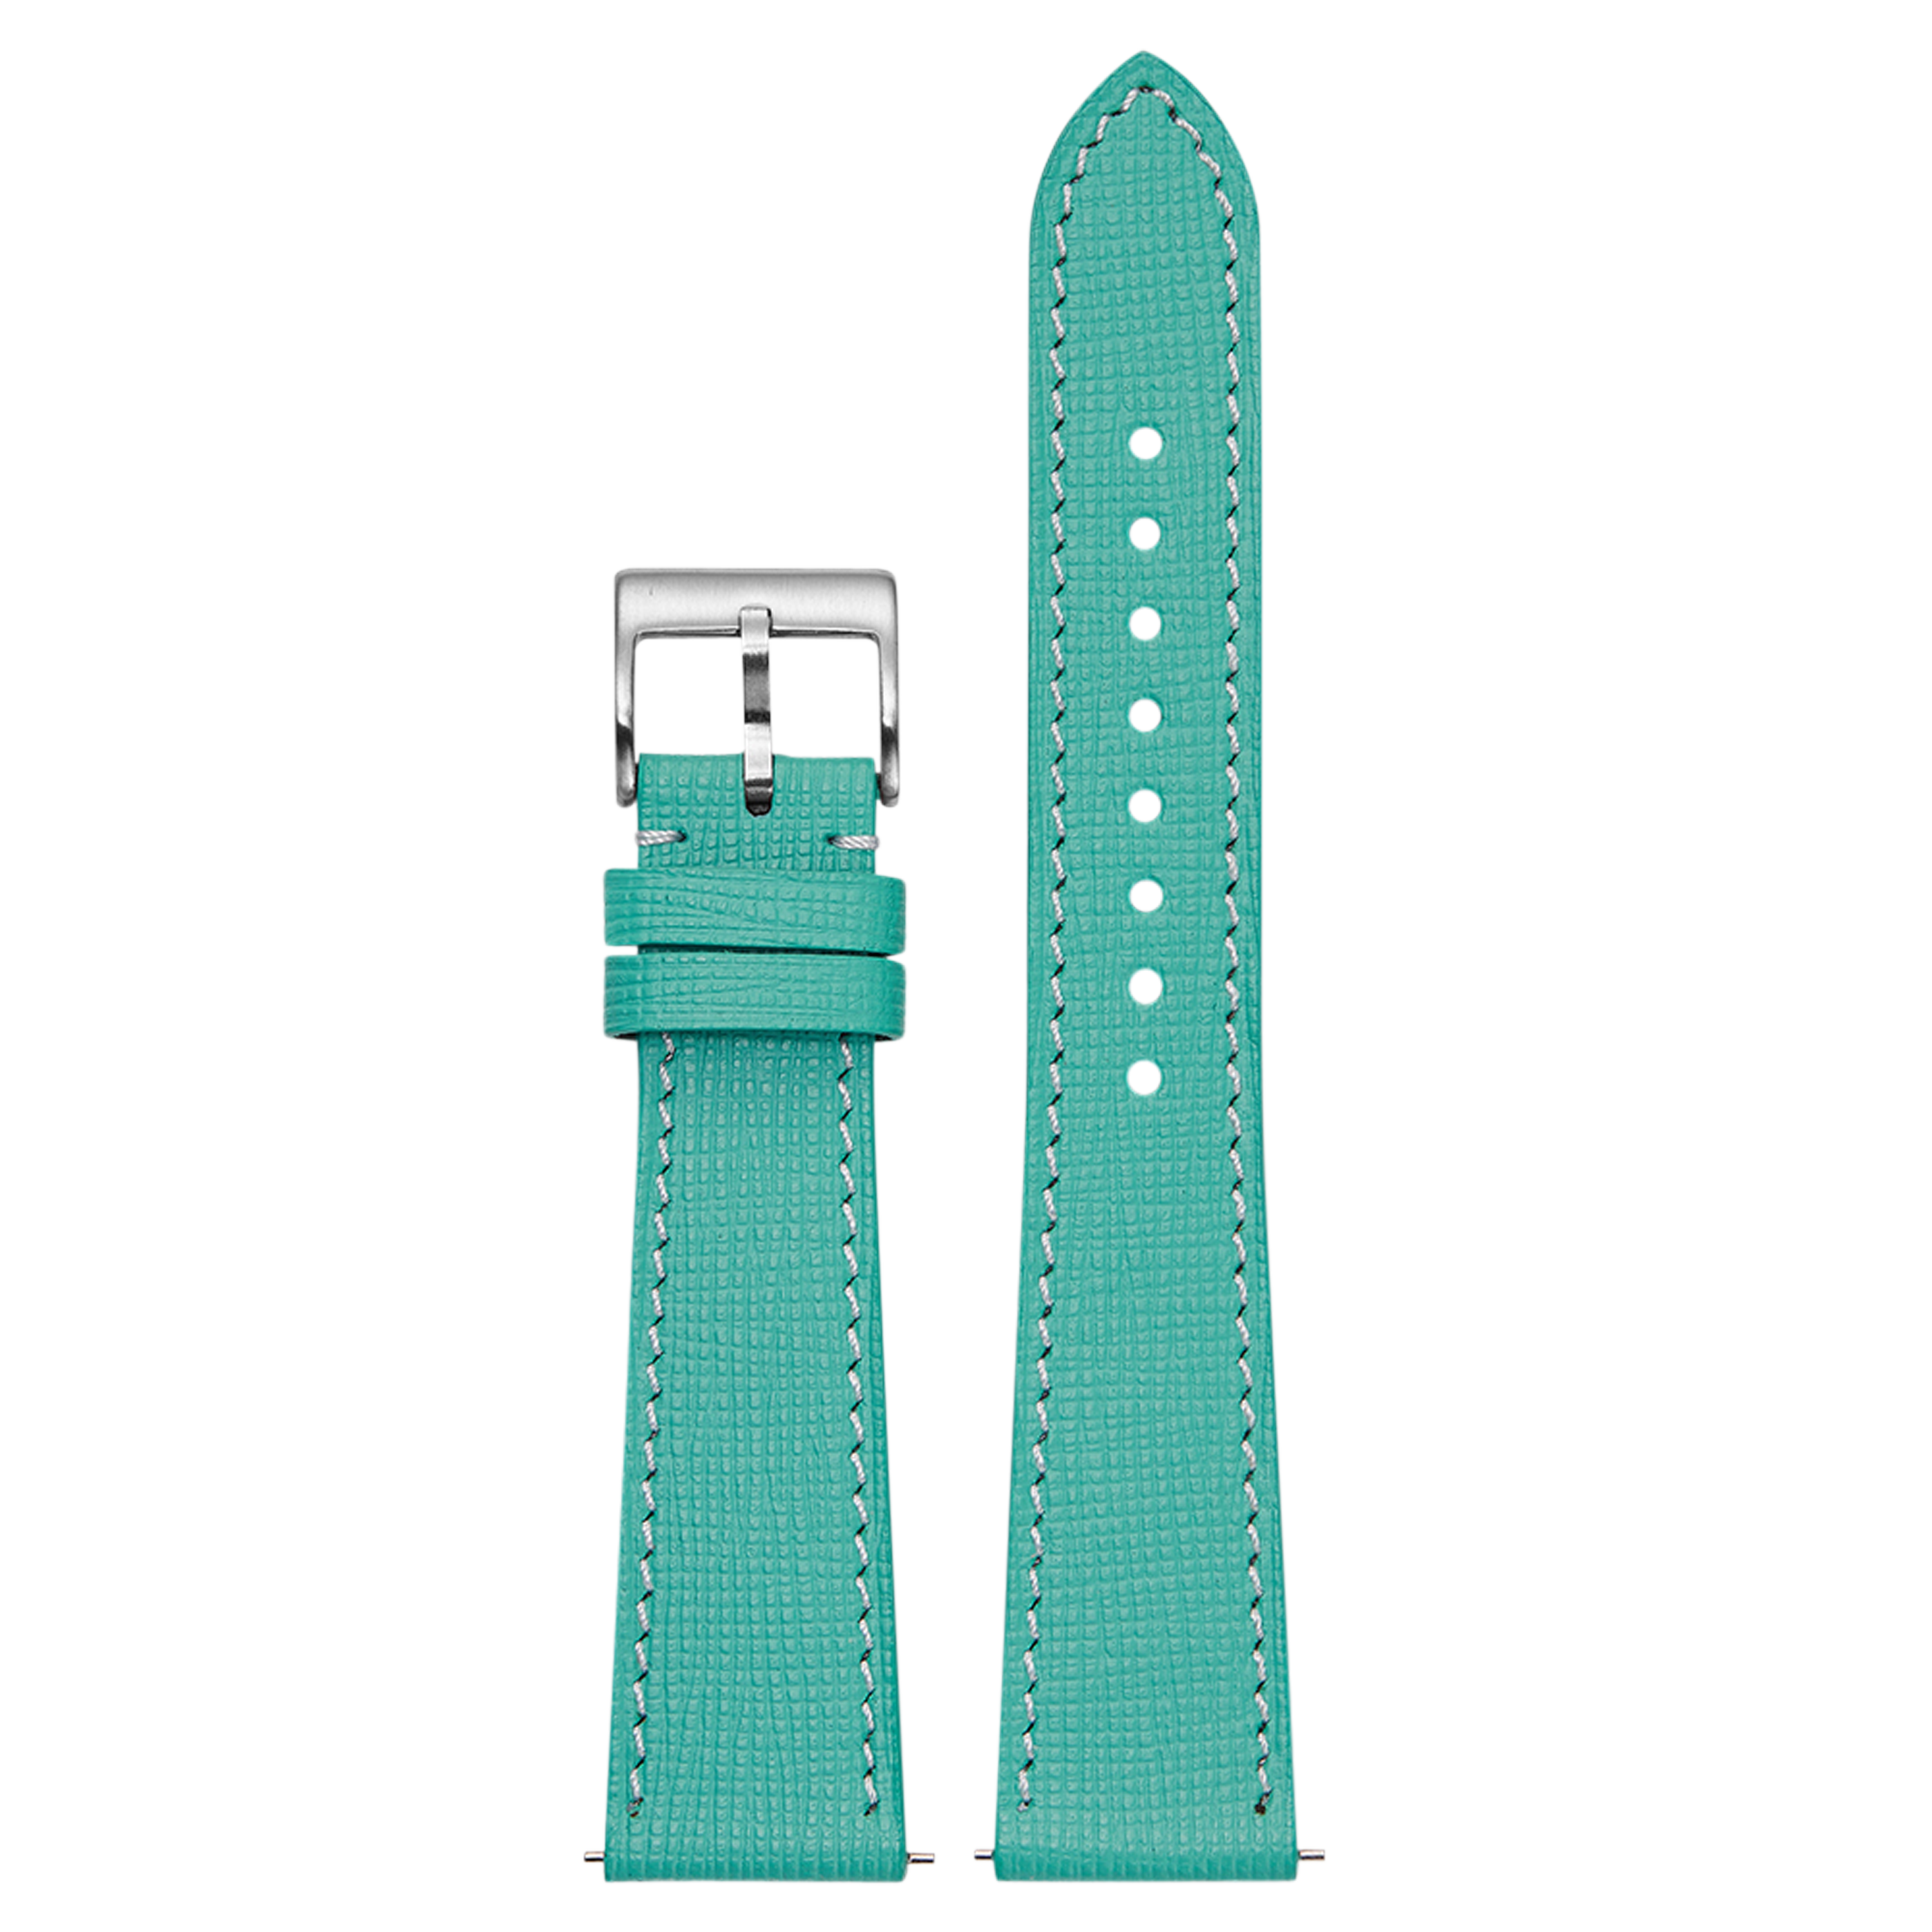 [Apple Watch] Chevre Saffiano Leather - Tiffany Blue with White Stitching